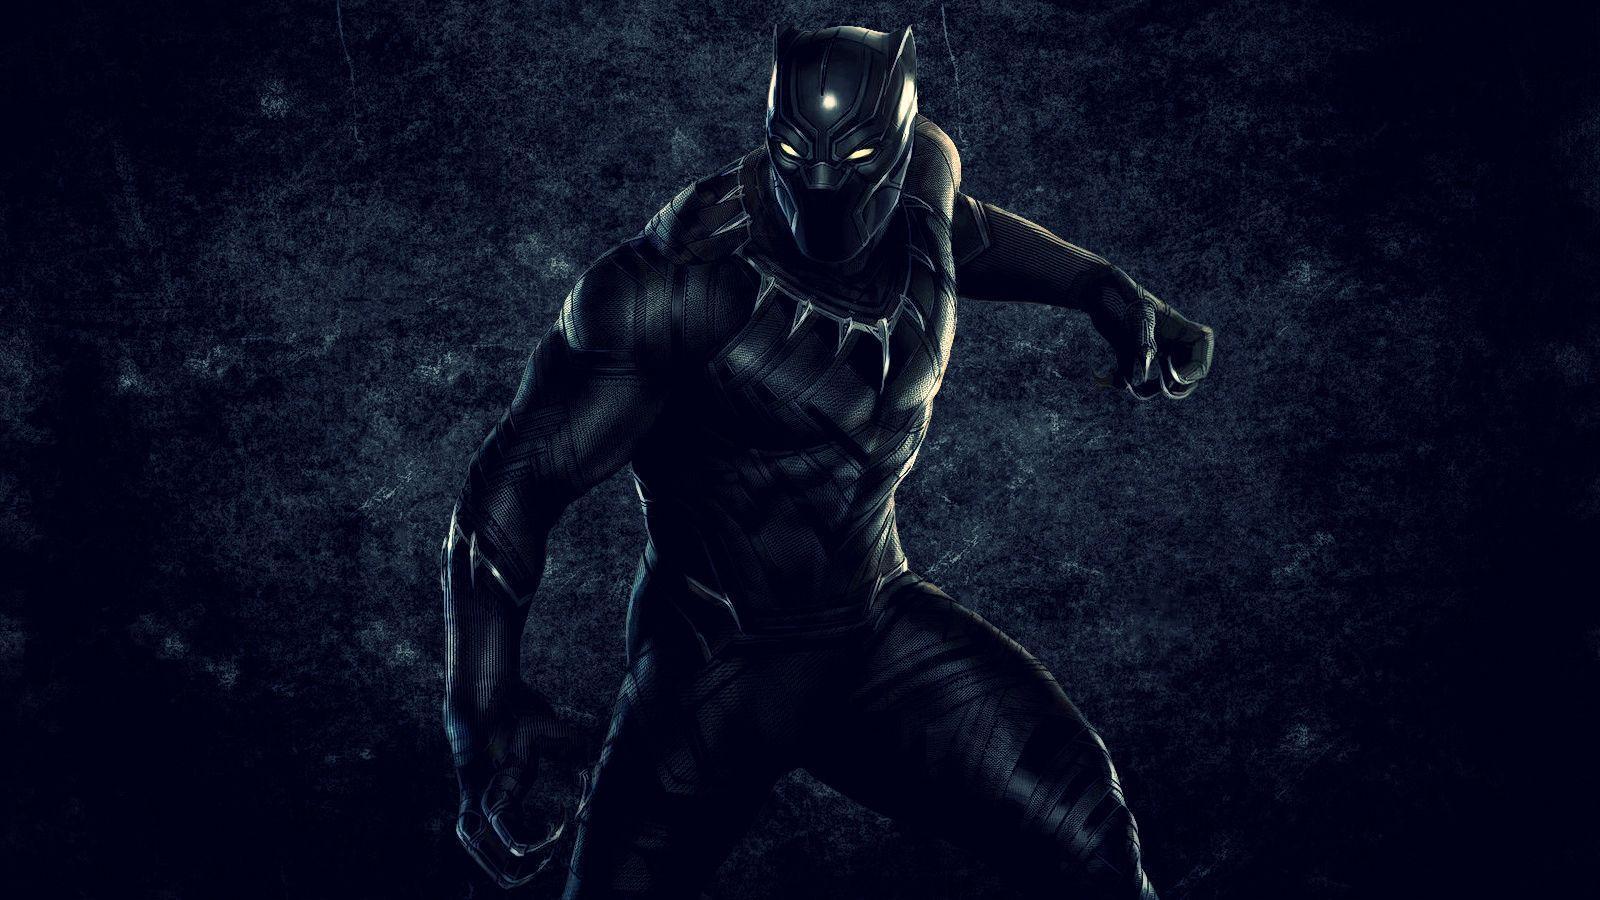 1600 x 900 · jpeg - Black Panther Marvel Wallpapers - Wallpaper Cave